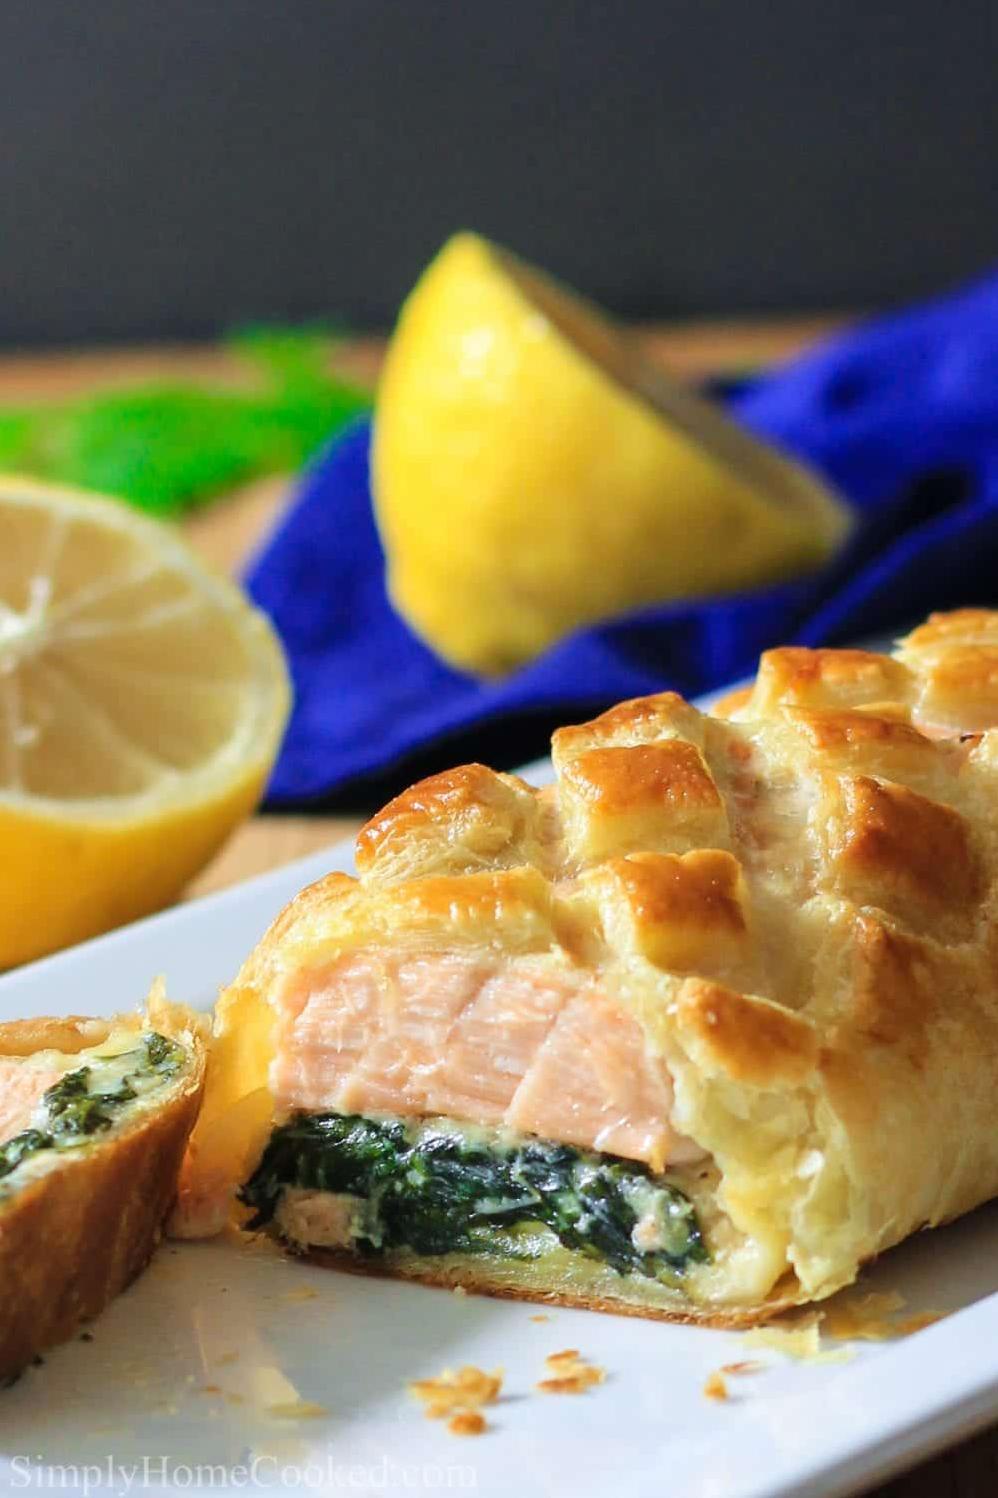  With spinach tucked around the salmon, this dish packs a punch of flavor and nutrition!